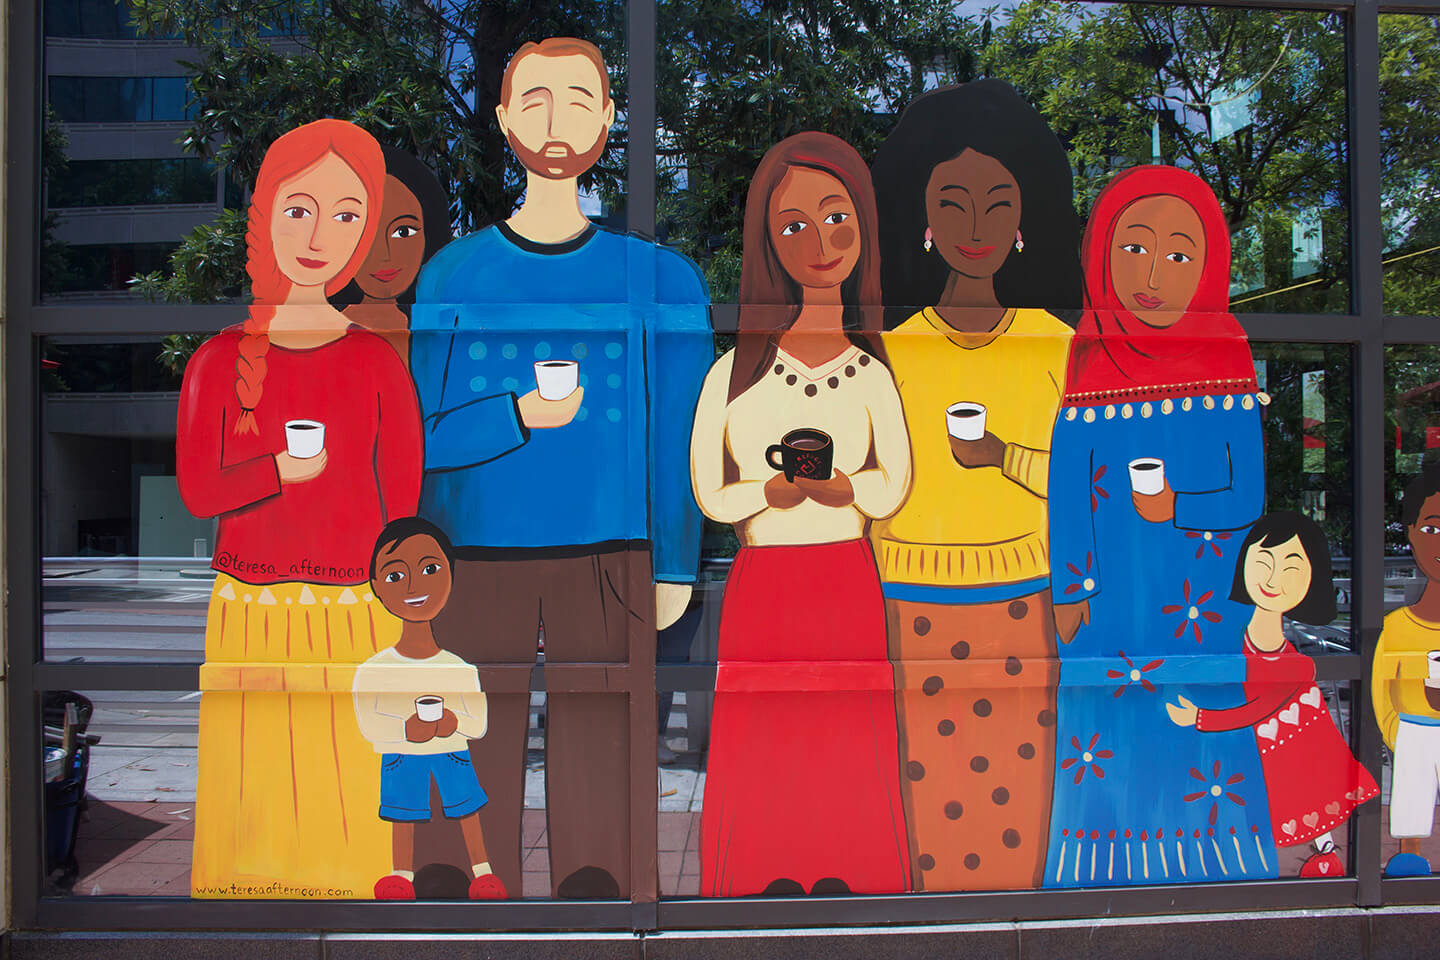 The Woodruff Arts Center Announces New Window Mural at Refuge Coffee Midtown